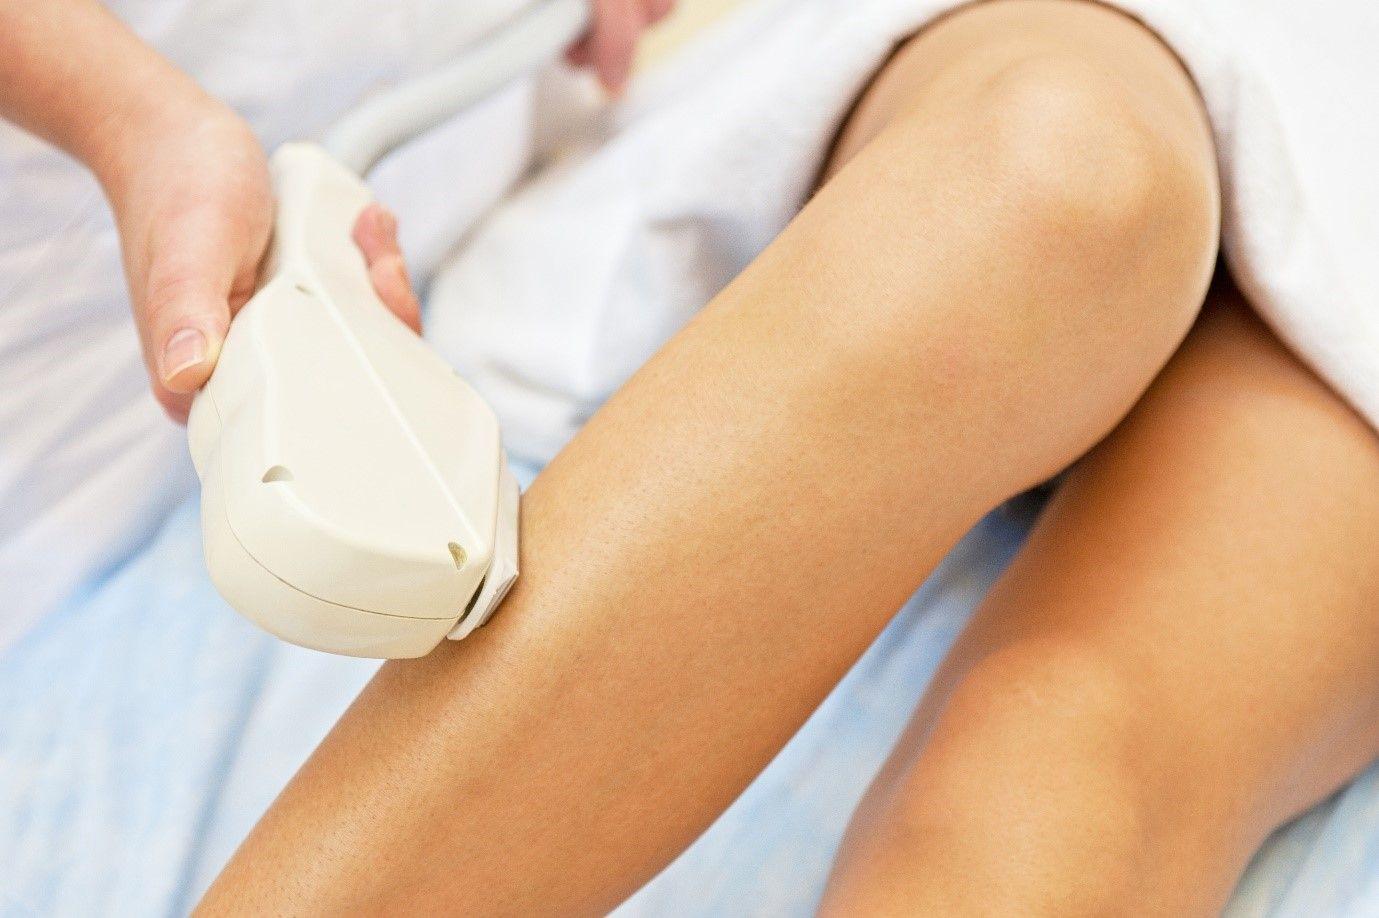 Benefits of laser hair removal